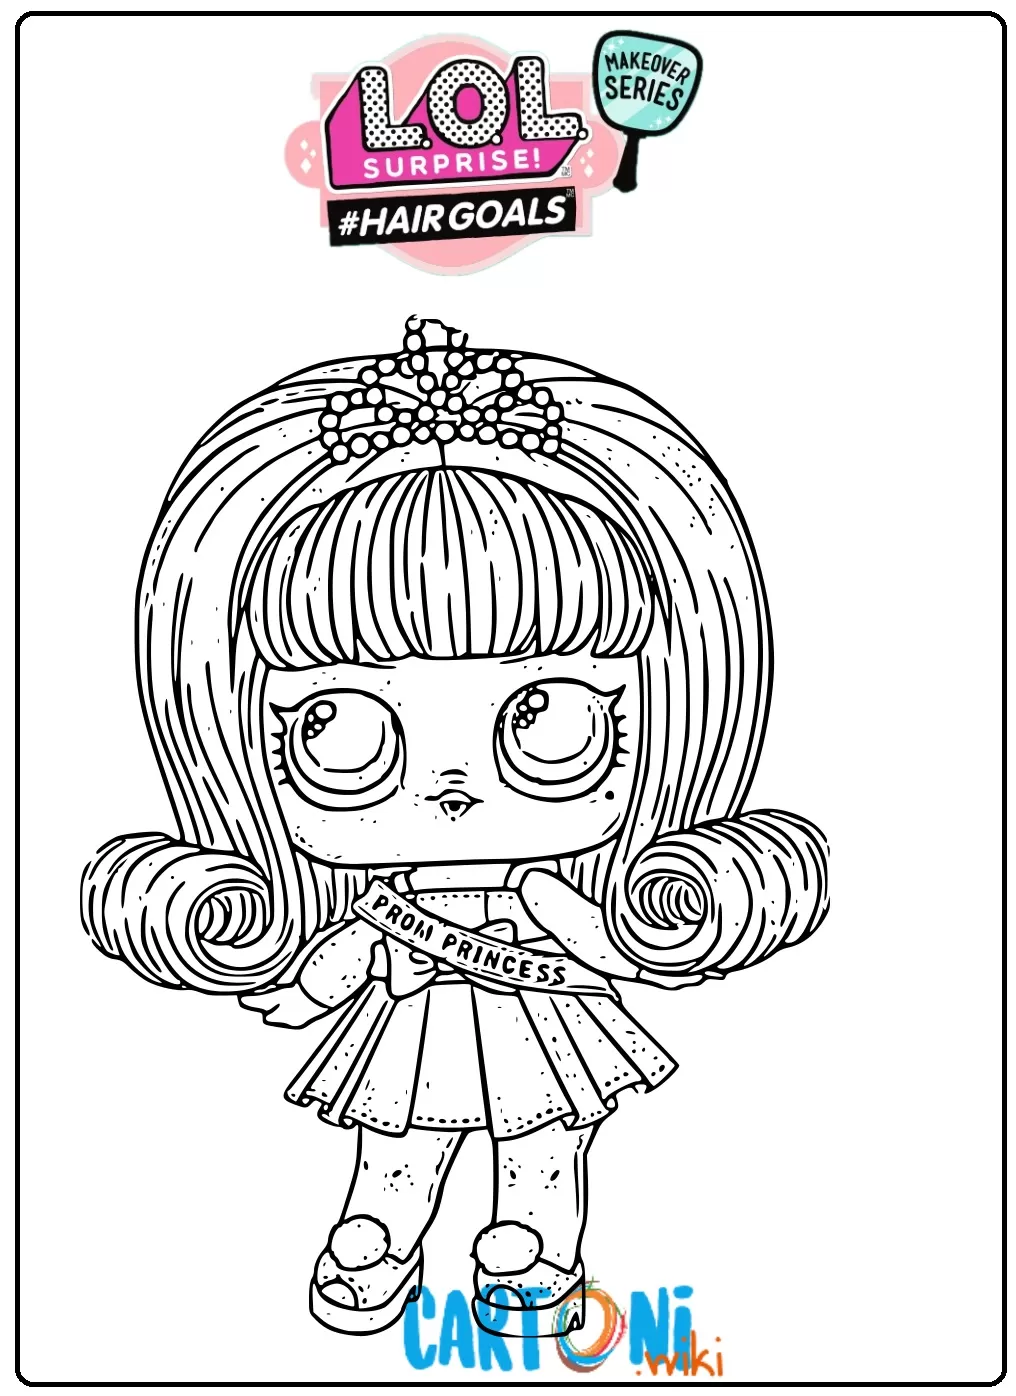 Prom Princess lol surprise hair goals coloring pages